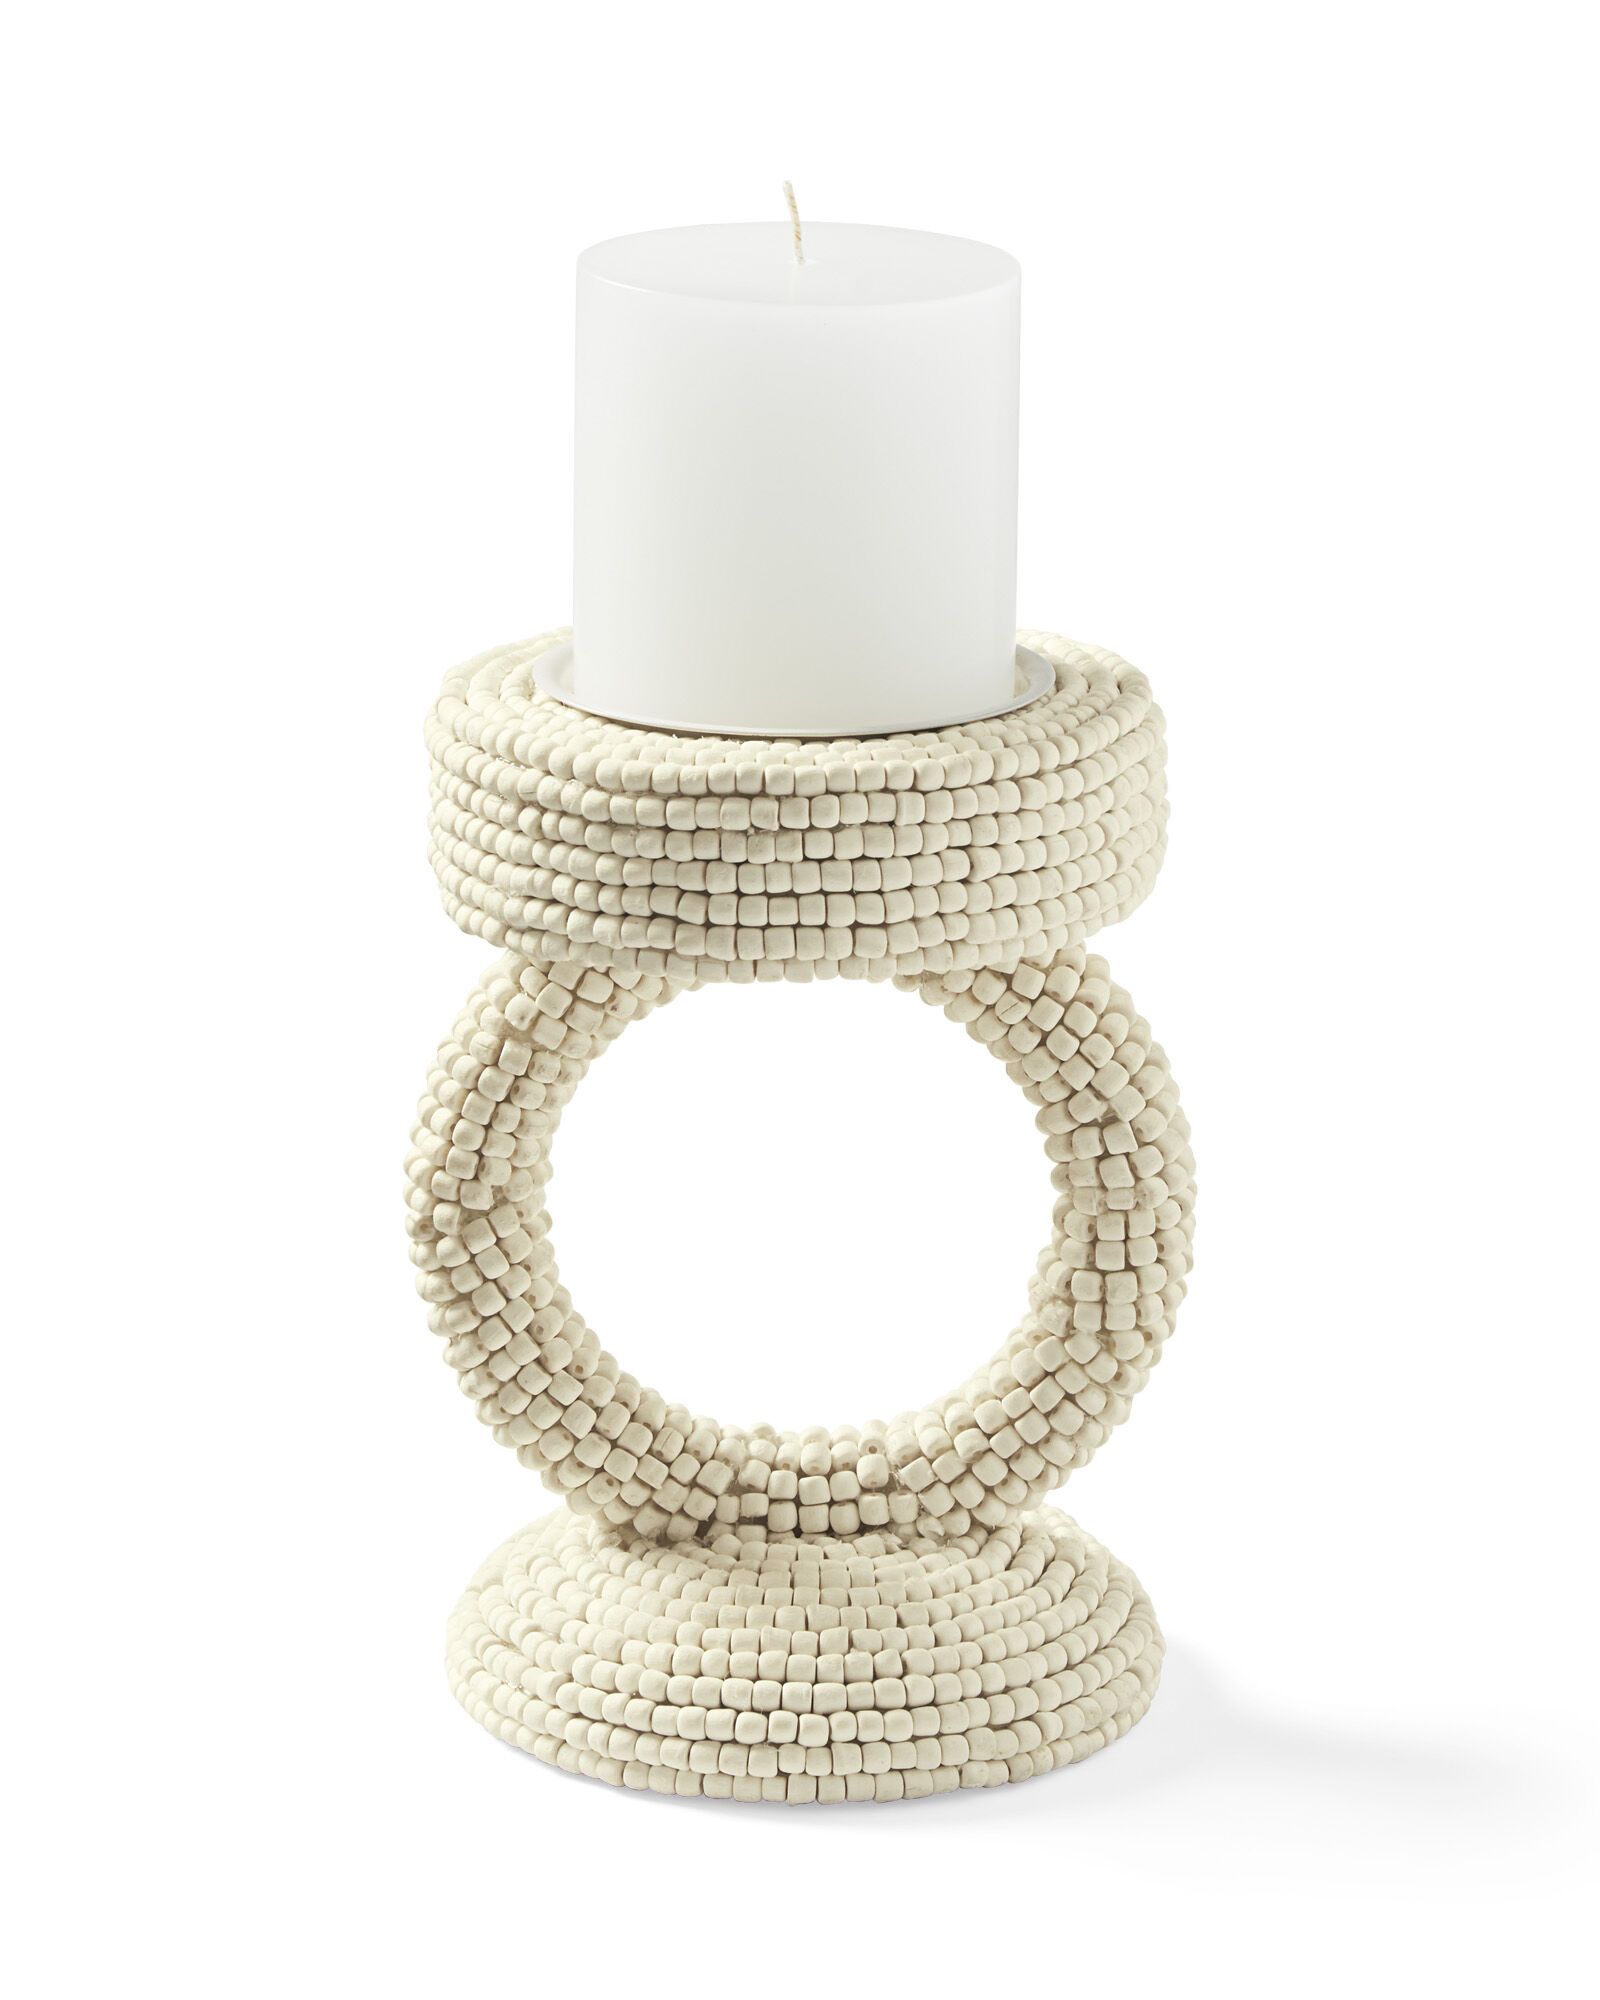 Del Sur Candleholder | Serena and Lily